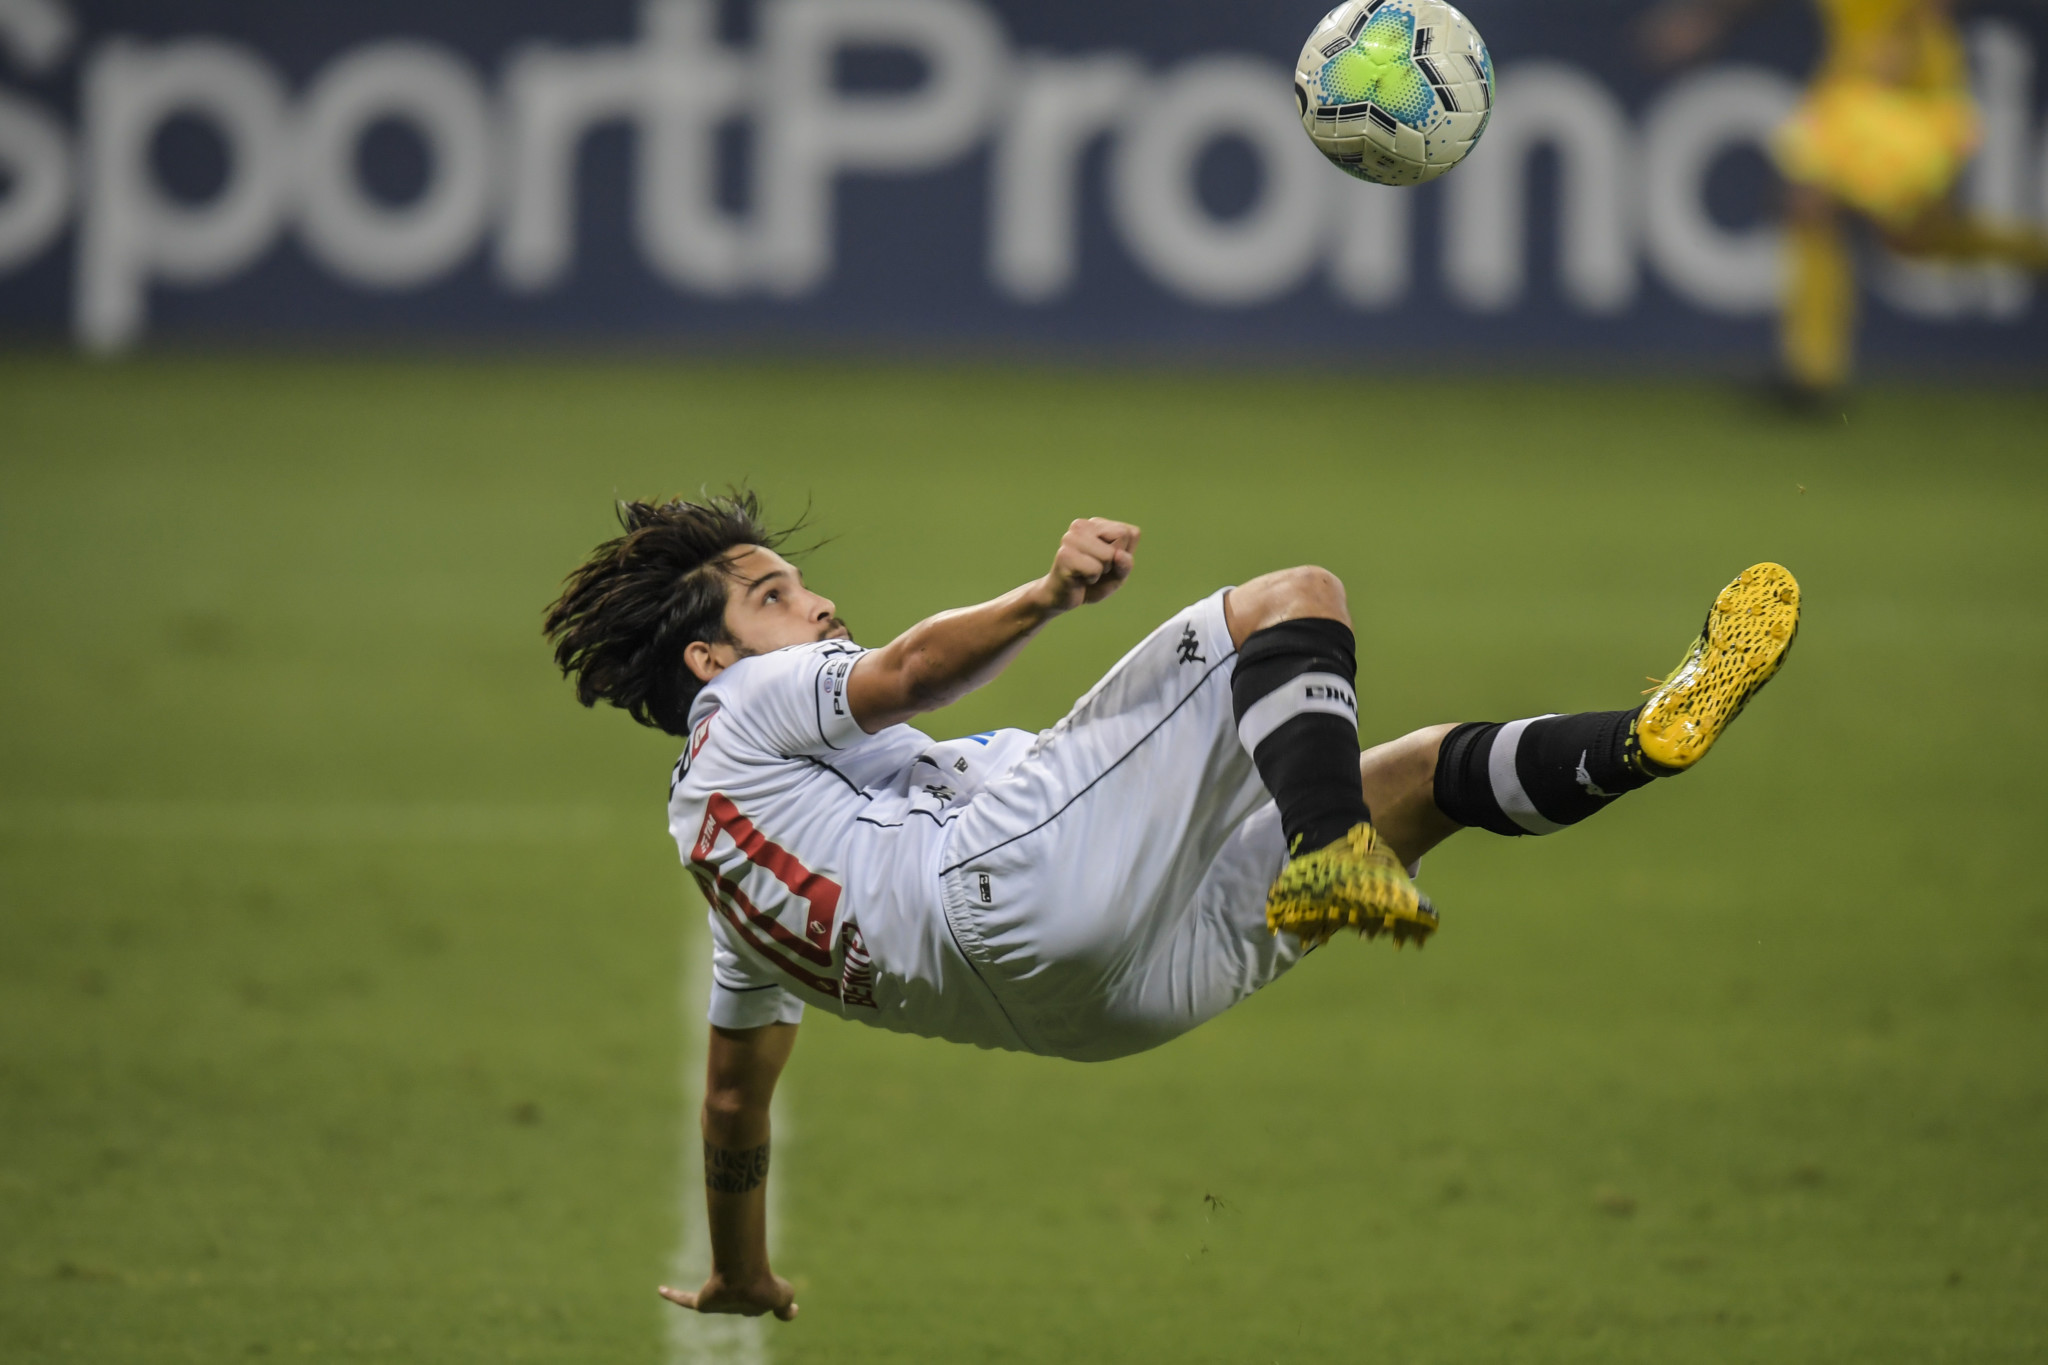 BELO HORIZONTE, BRAZIL - OCTOBER 04: Benitez #10 of Vasco da Gama kicks the ball to score a goal during a match between Atletico MG and Vasco da Gama as part of Brasileirao Series A 2020 at Mineirao Stadium on October 04, 2020 in Belo Horizonte, Brazil. The match is played behind closed doors and with precautionary measures against the spread of coronavirus (COVID-19).  (Photo by Pedro Vilela/Getty Images)